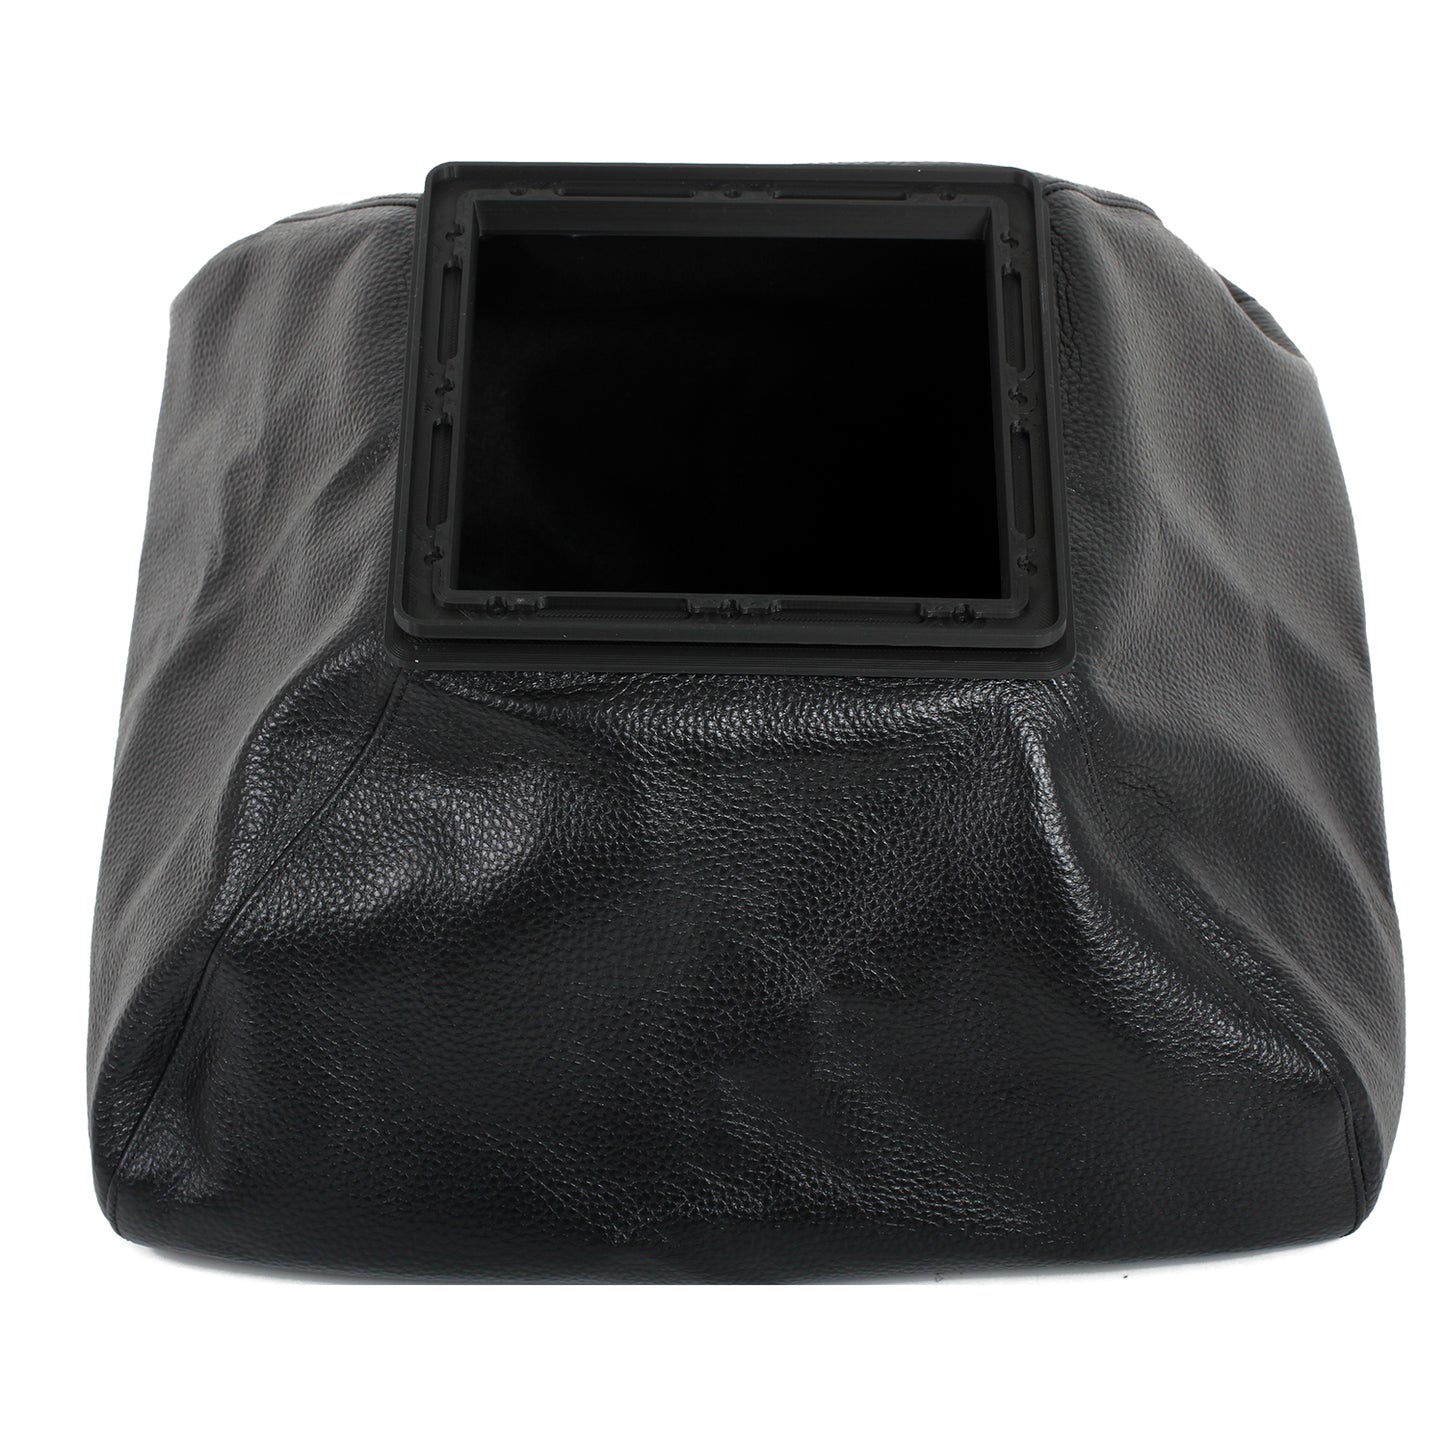 NEW eTone Wide Angle Bag Bellows For Wista 45D RF SP VX 4x5 large Format Camera